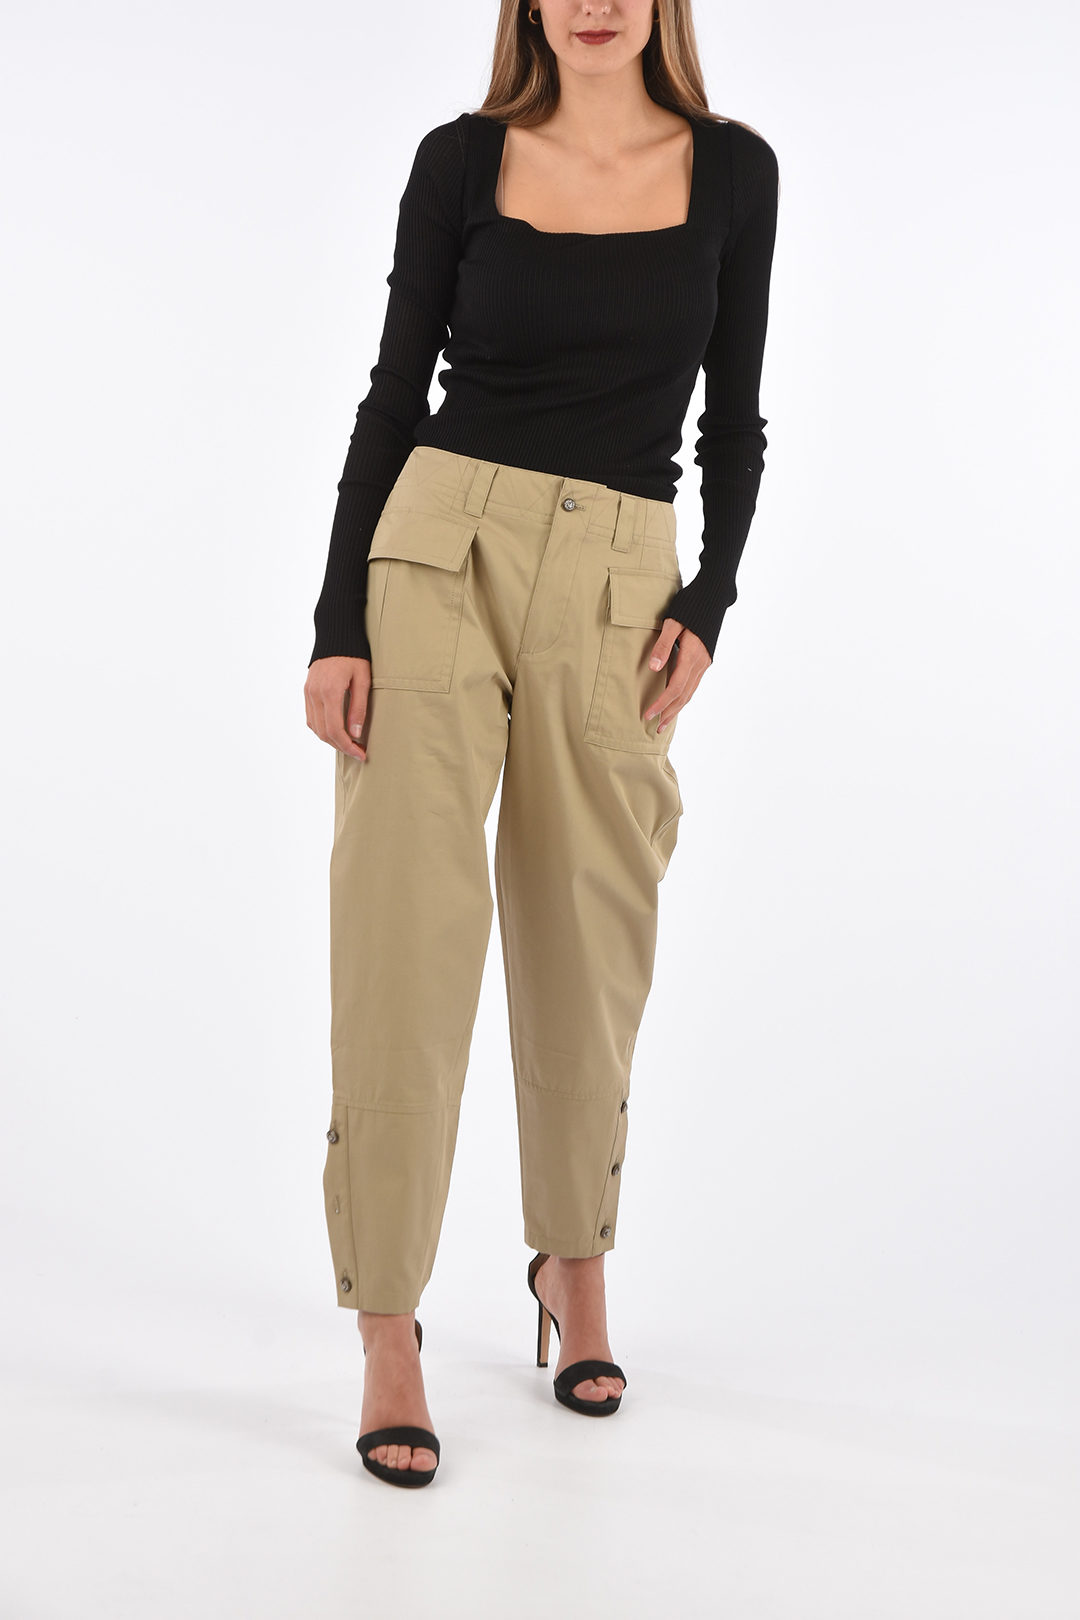 Dolce & Gabbana Wide leg pants with ankle button women - Glamood 